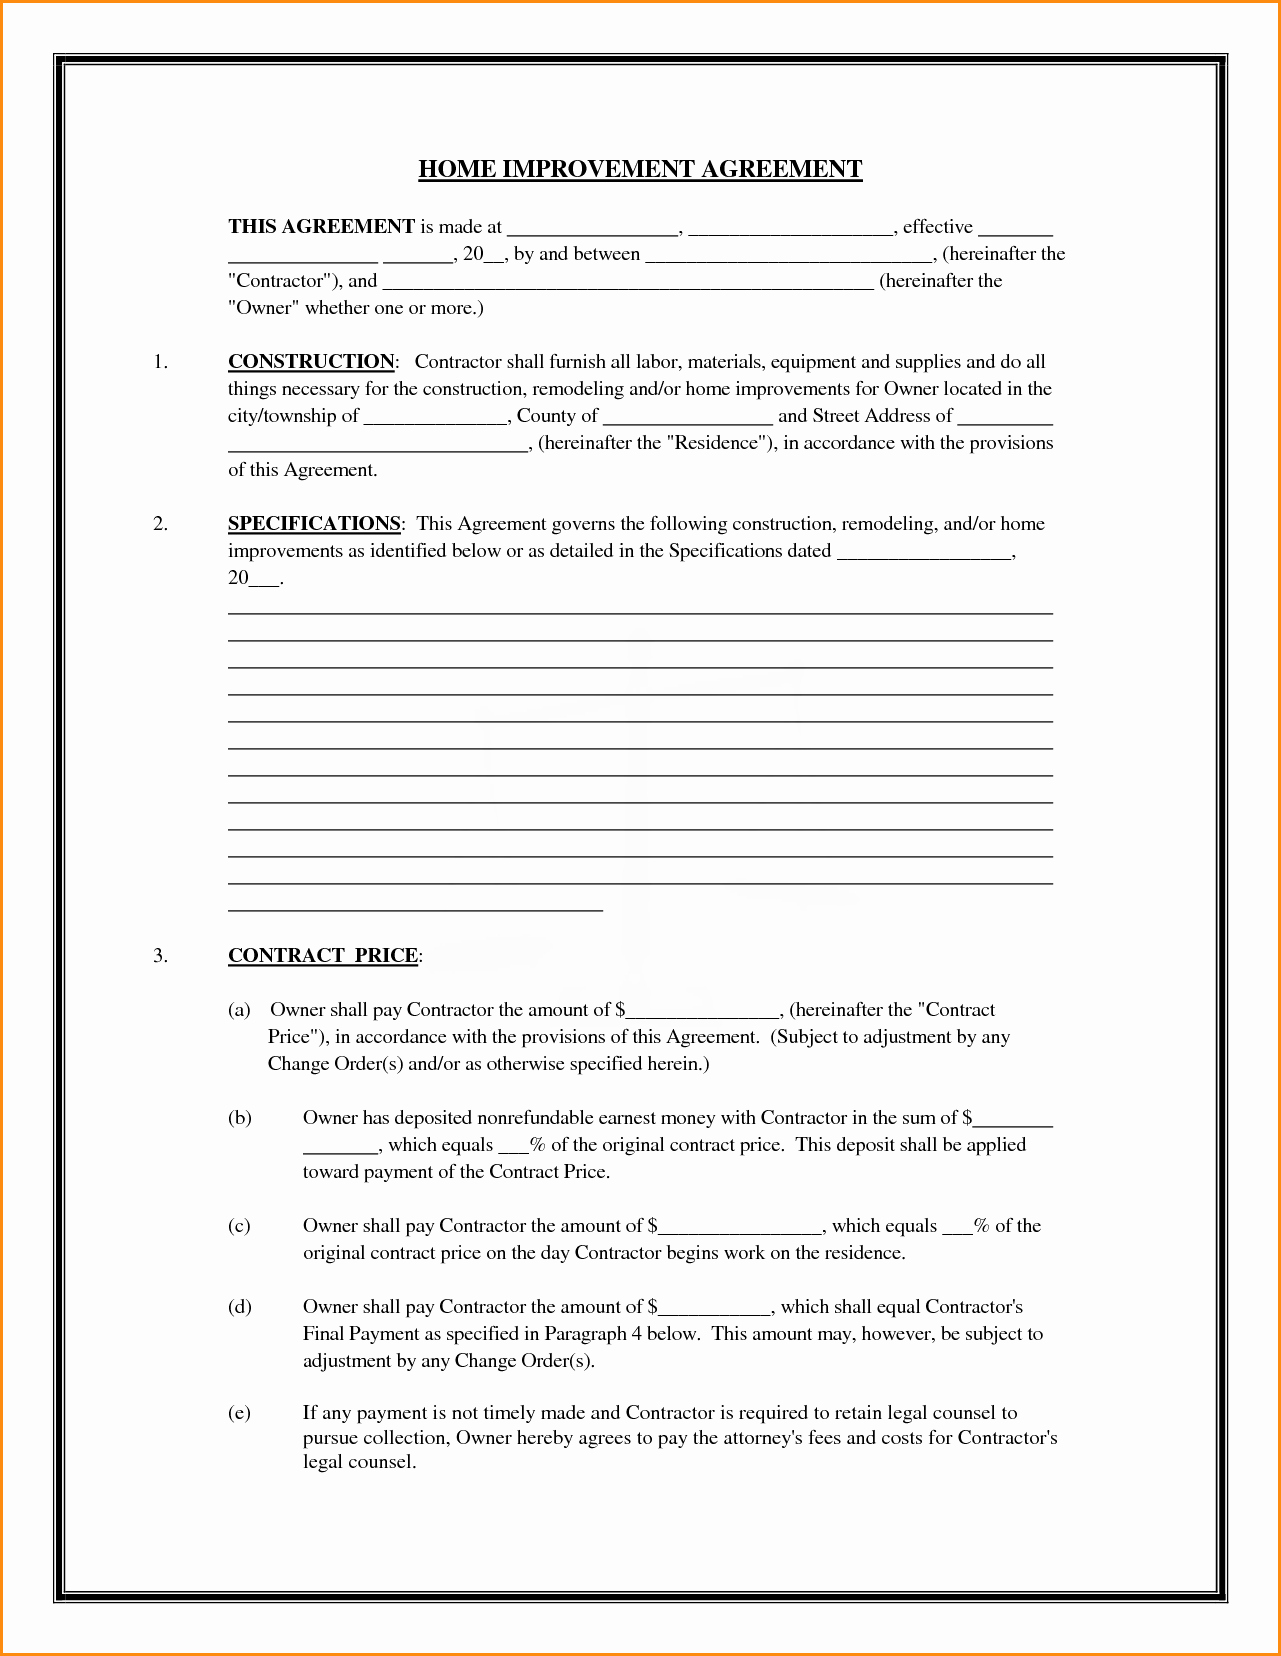 Home Improvement Contract Template Best Of Florida Score Basketball